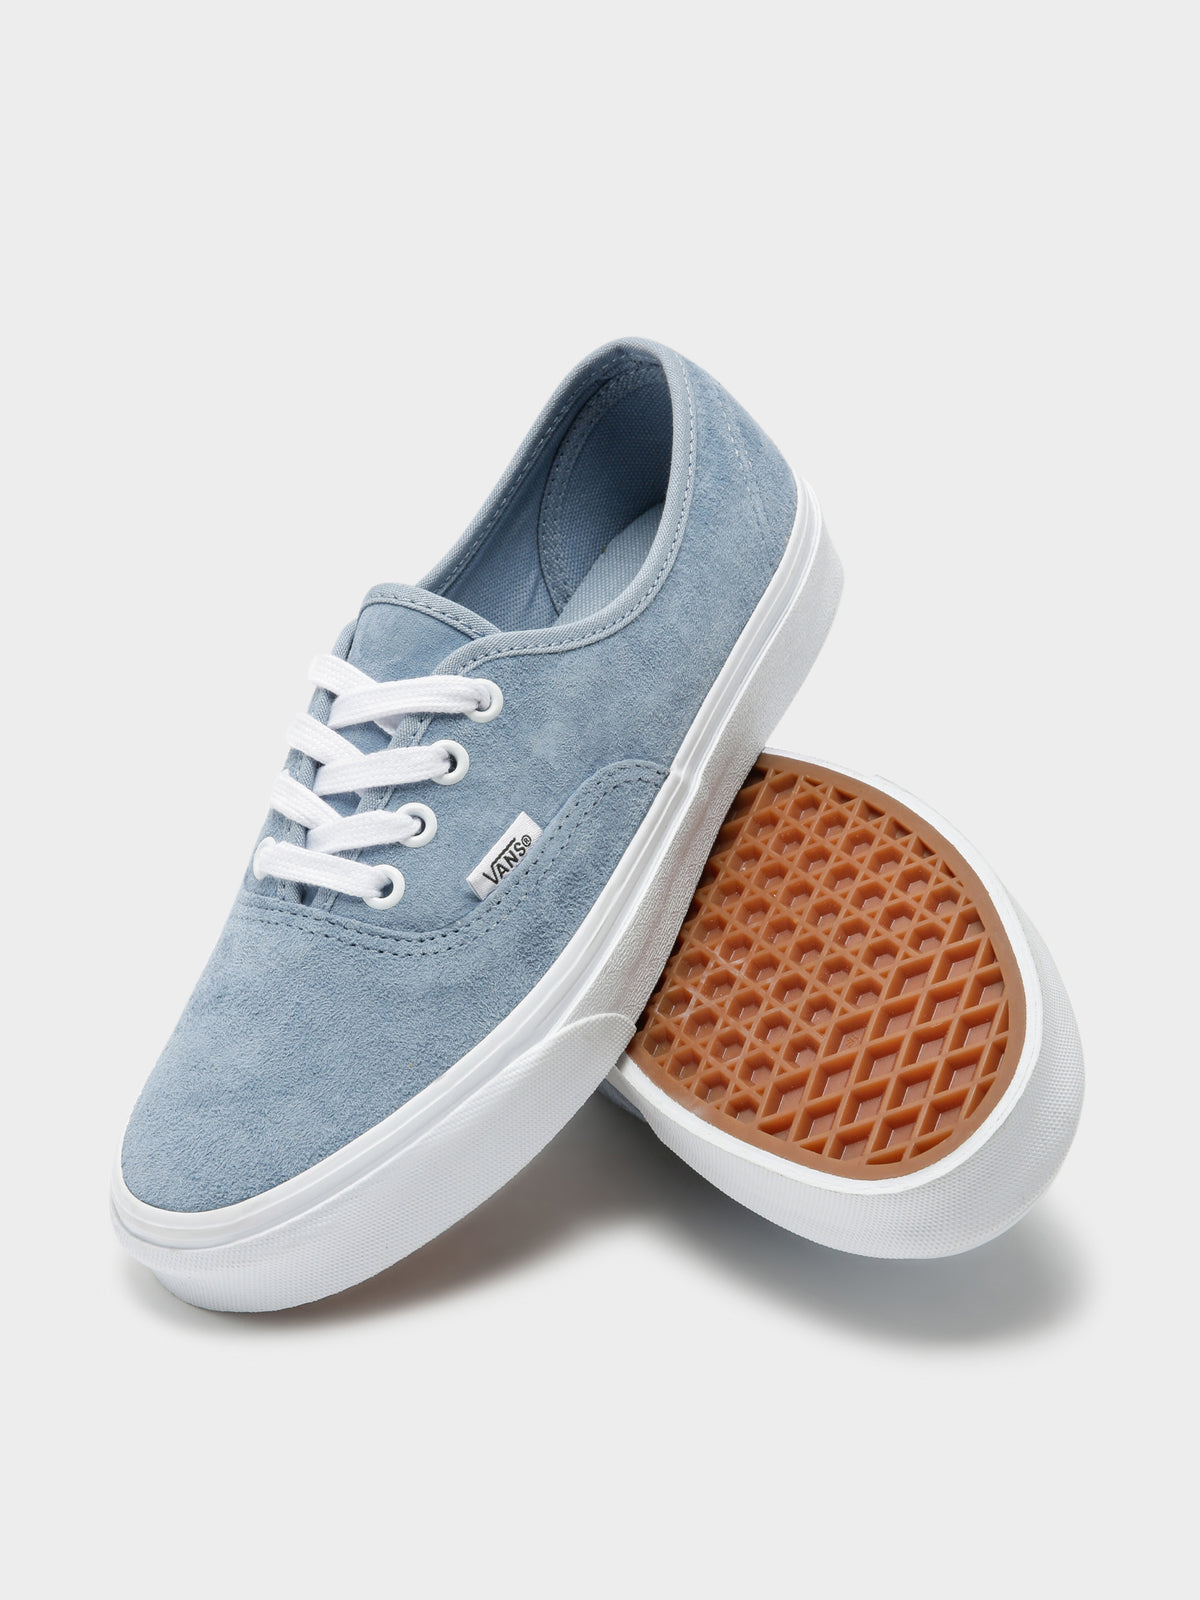 Unisex Authentic Pig Suede Sneakers in Ashley Blue